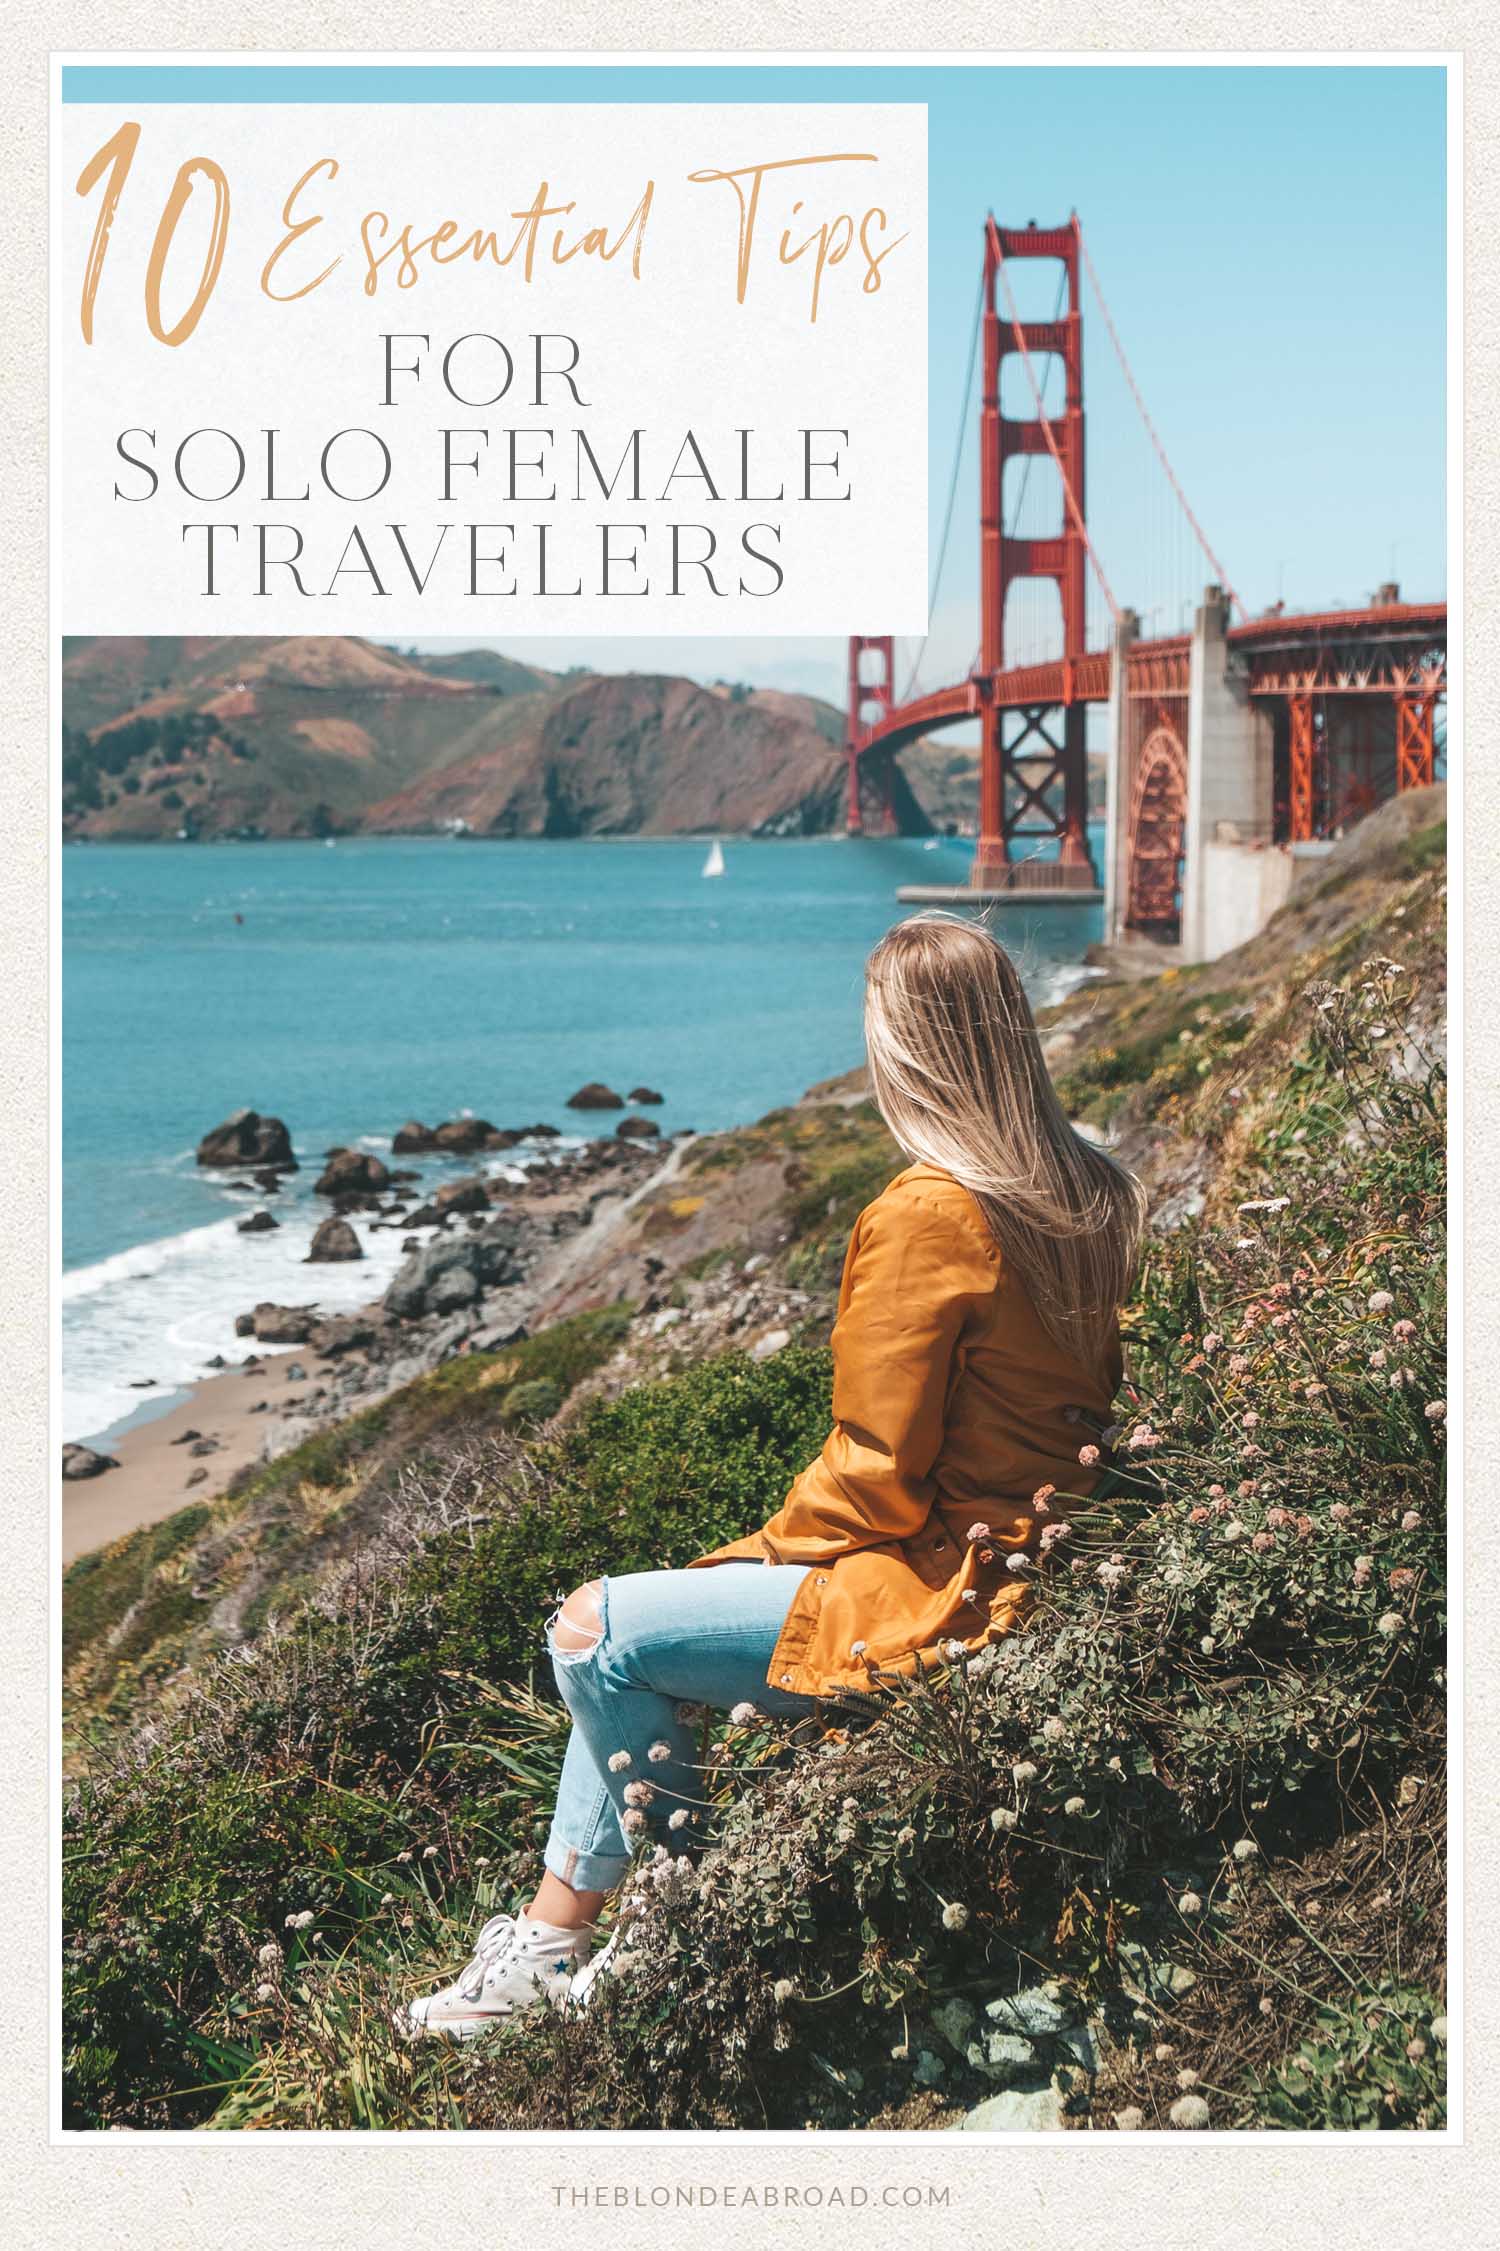 10 essential tips for solo female